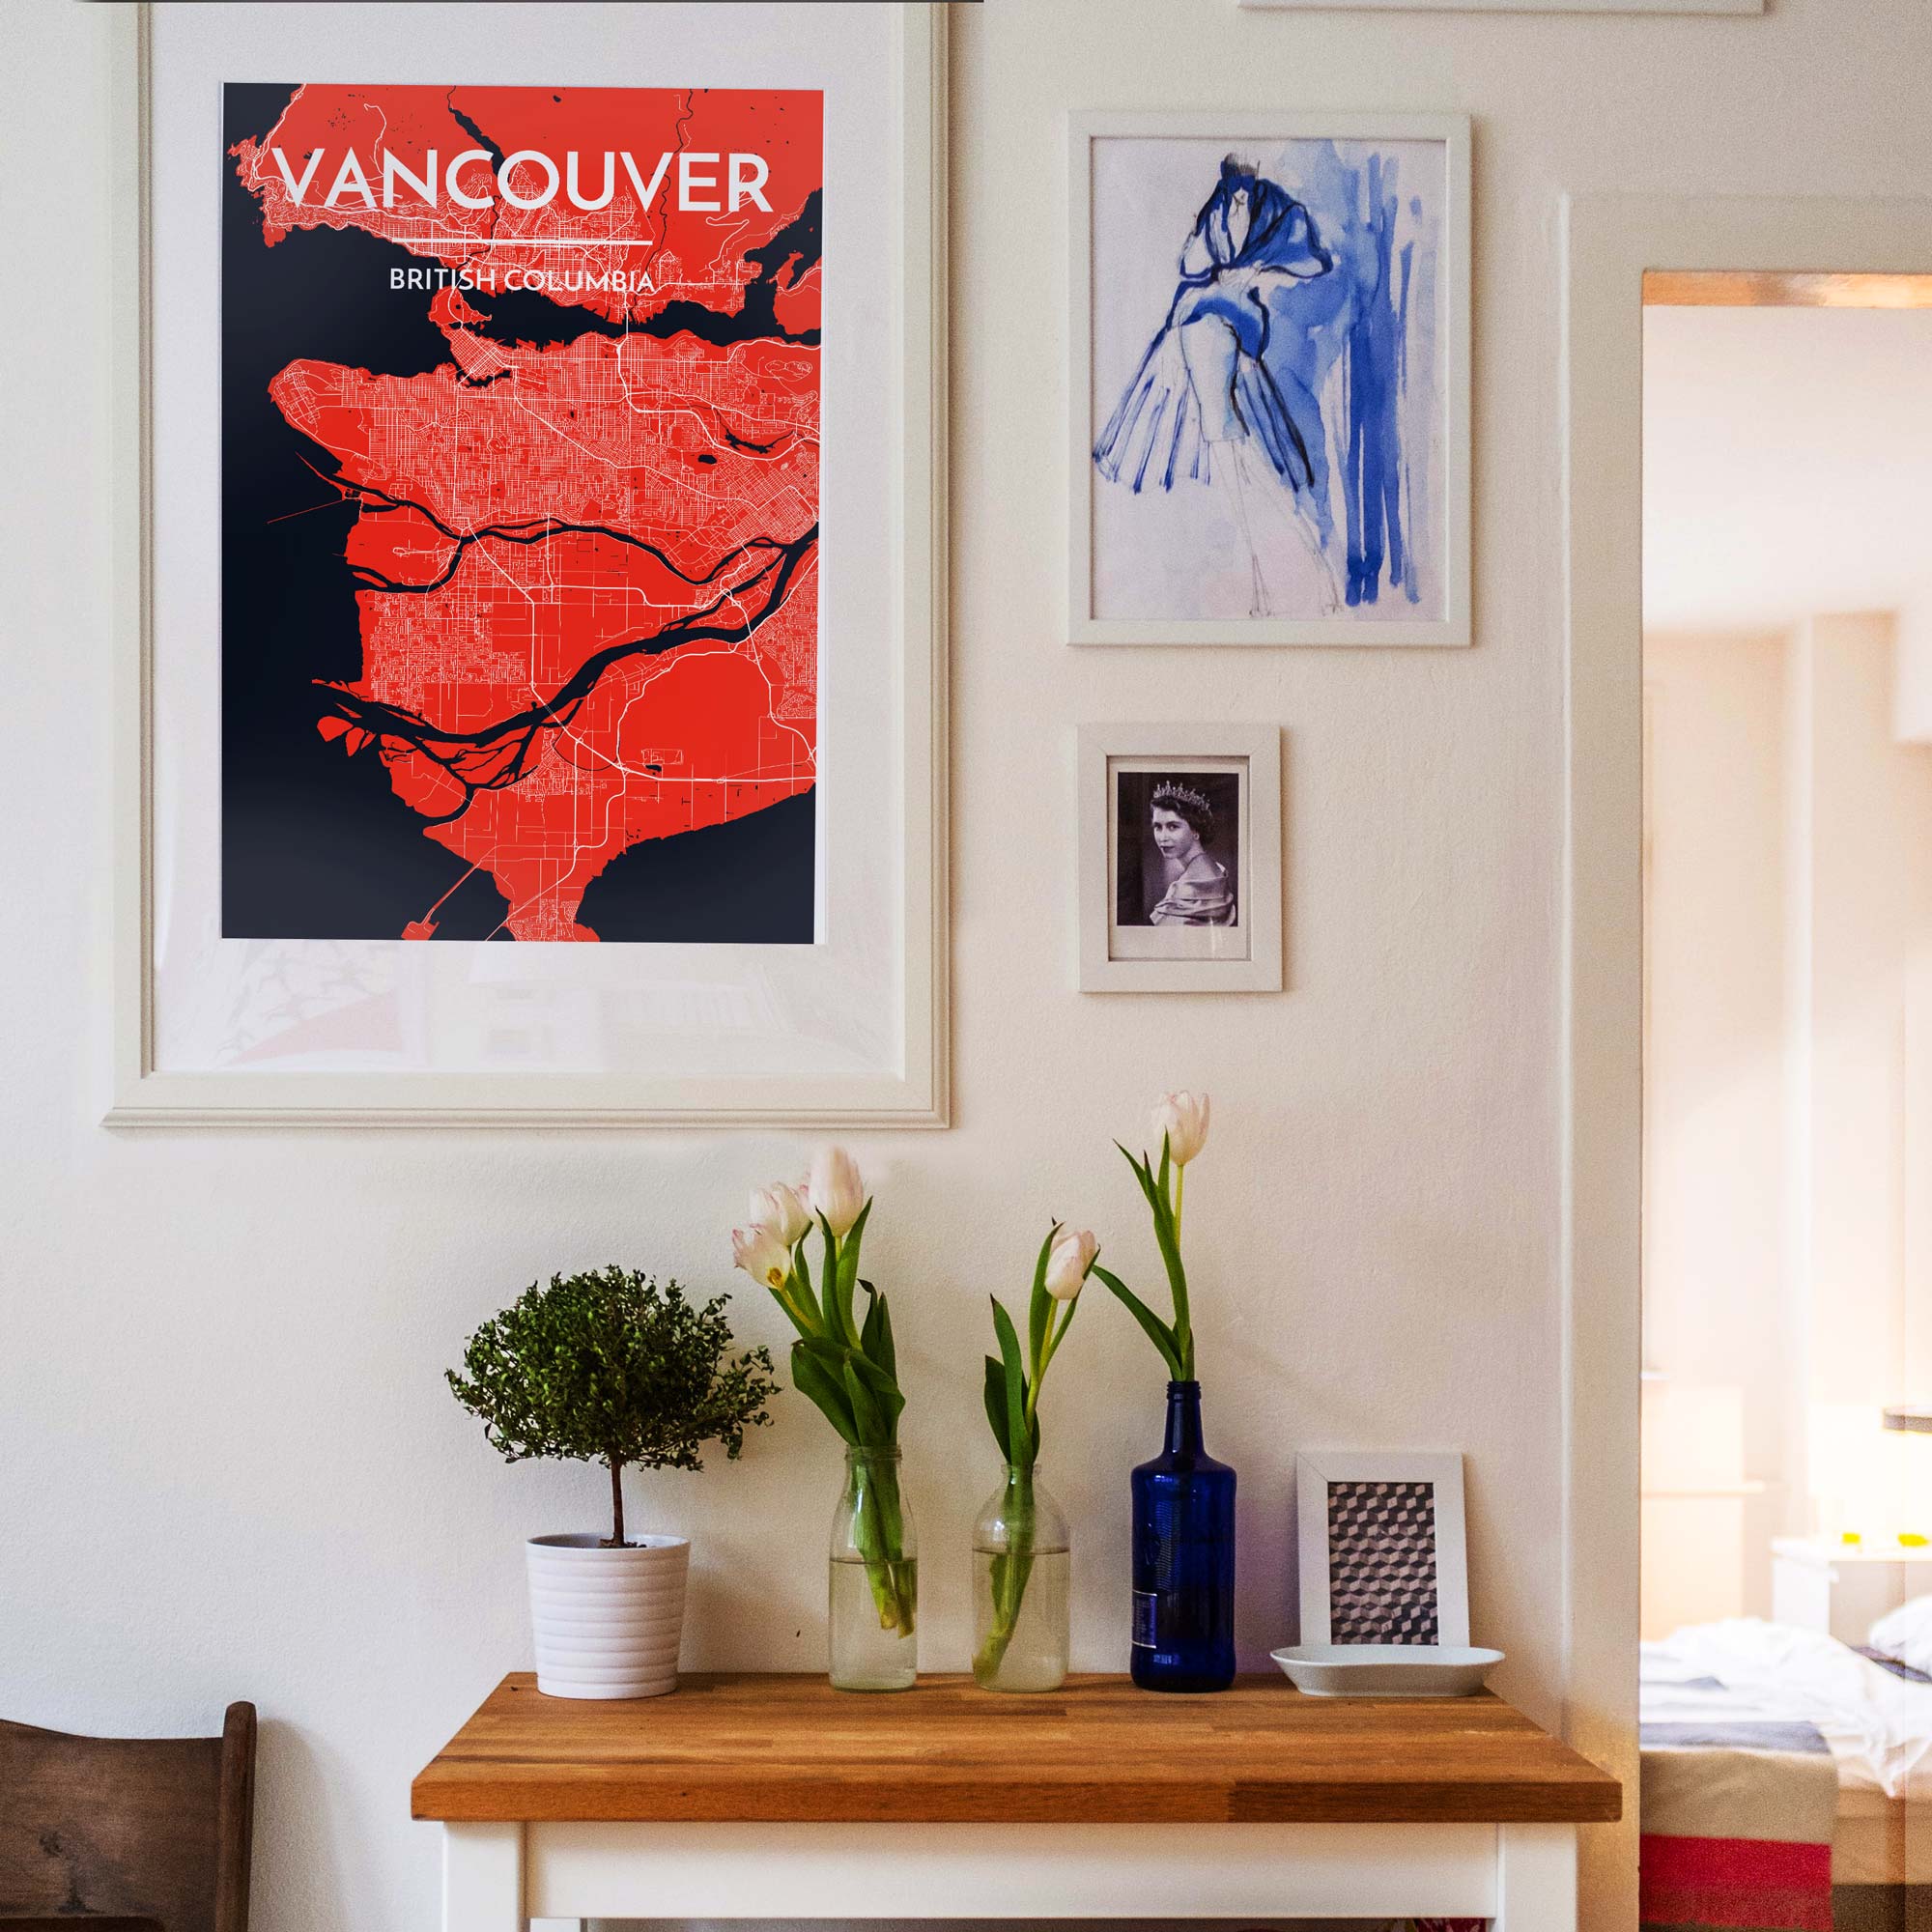 Live like you’re in Vancouver - From the comfort of your living room